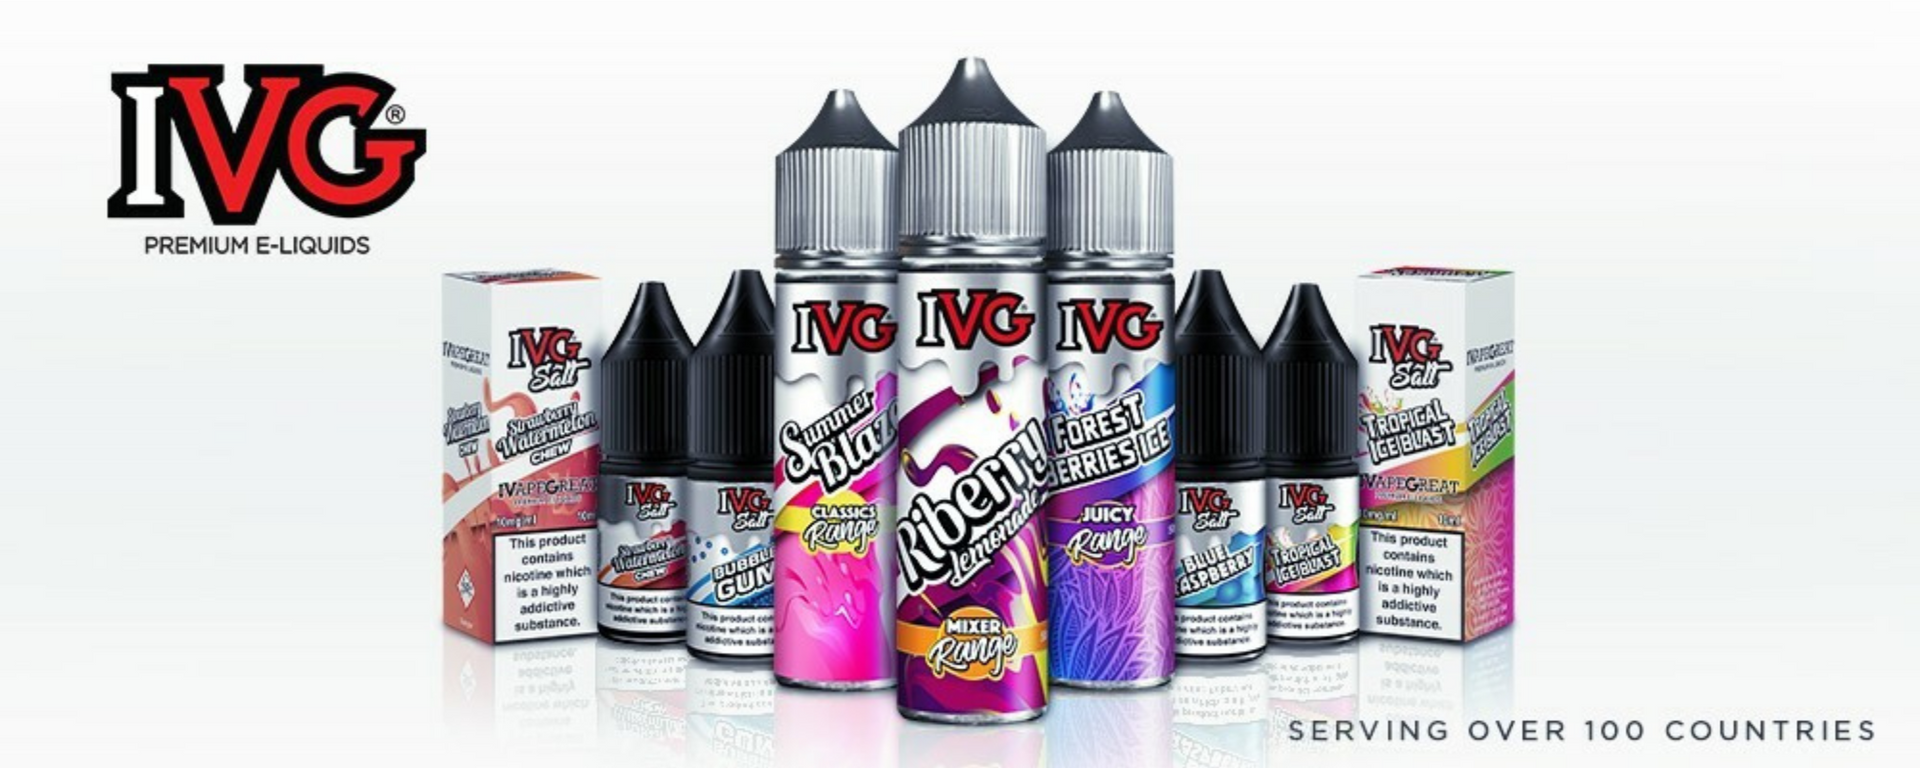 IVG - I Vape Great All Liquids And Nicotine Shots Available At Shop On Demand